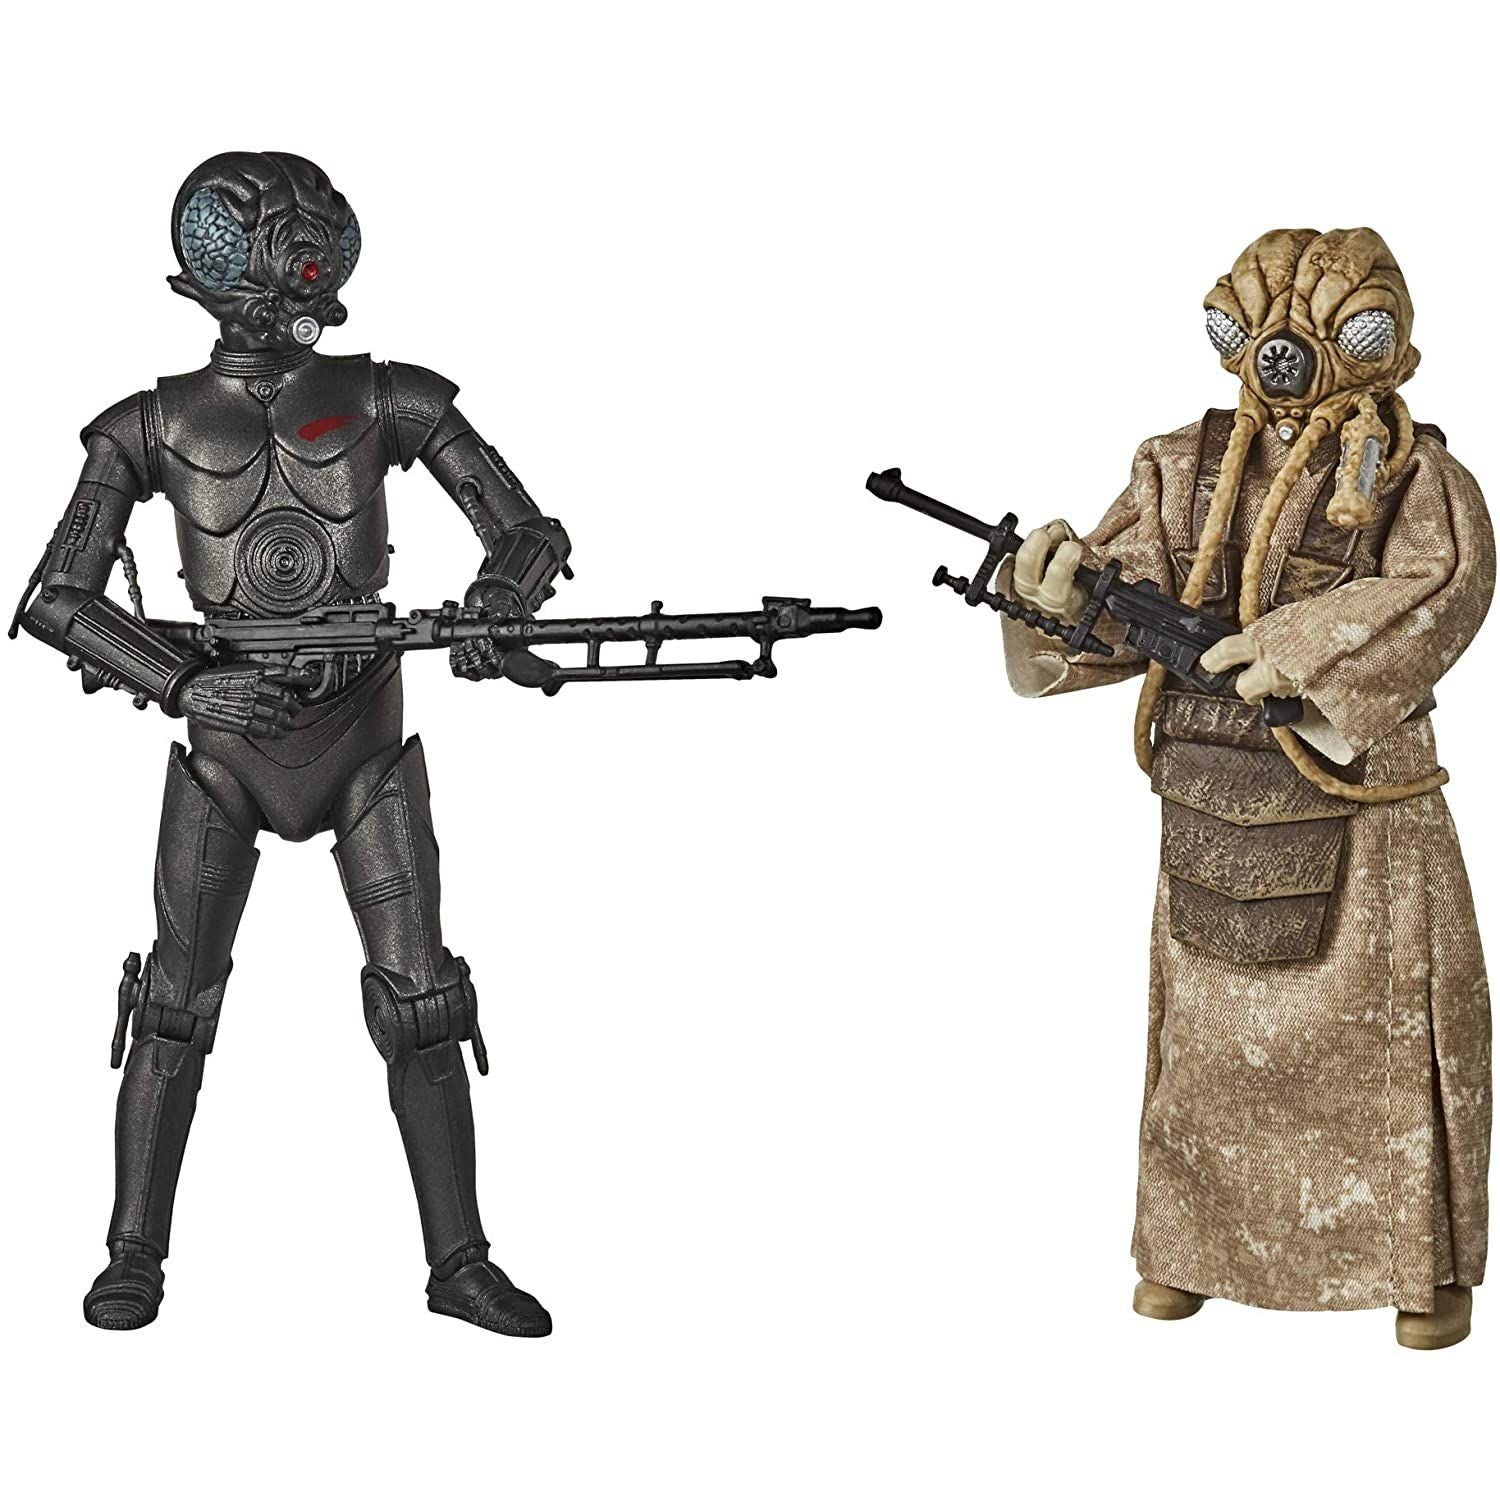 Star Wars Episode V Bounty Hunters 40th Anniversary Edition Action Figures